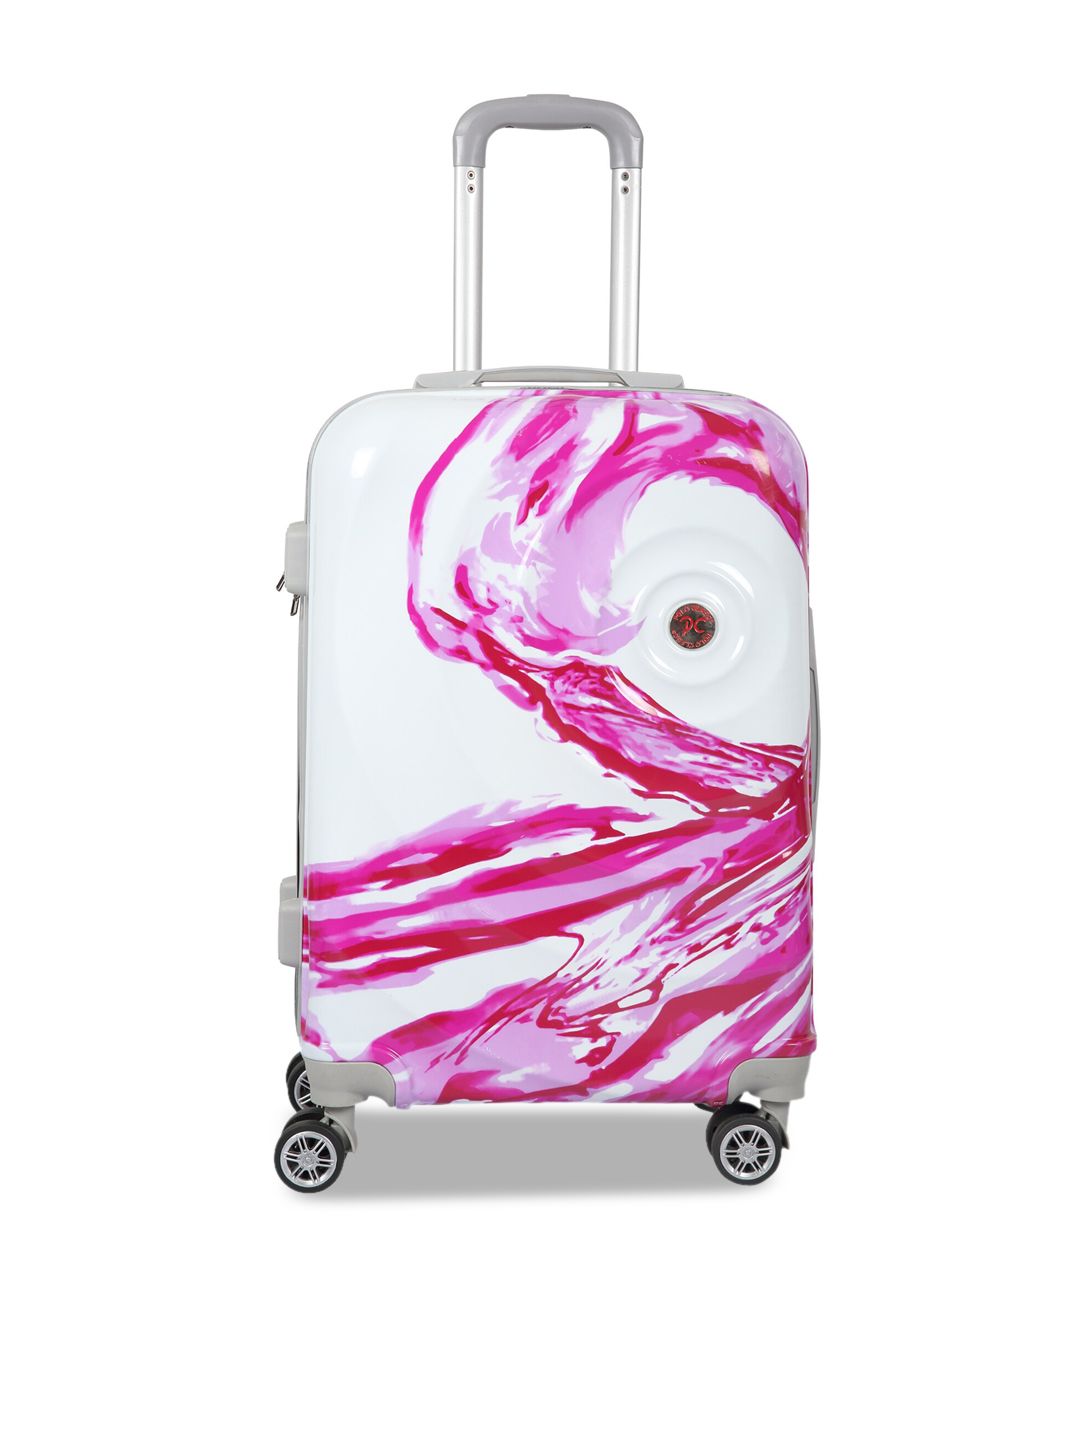 Polo Class Pink & White Printed Hard-Sided Medium Trolley Suitcase Price in India